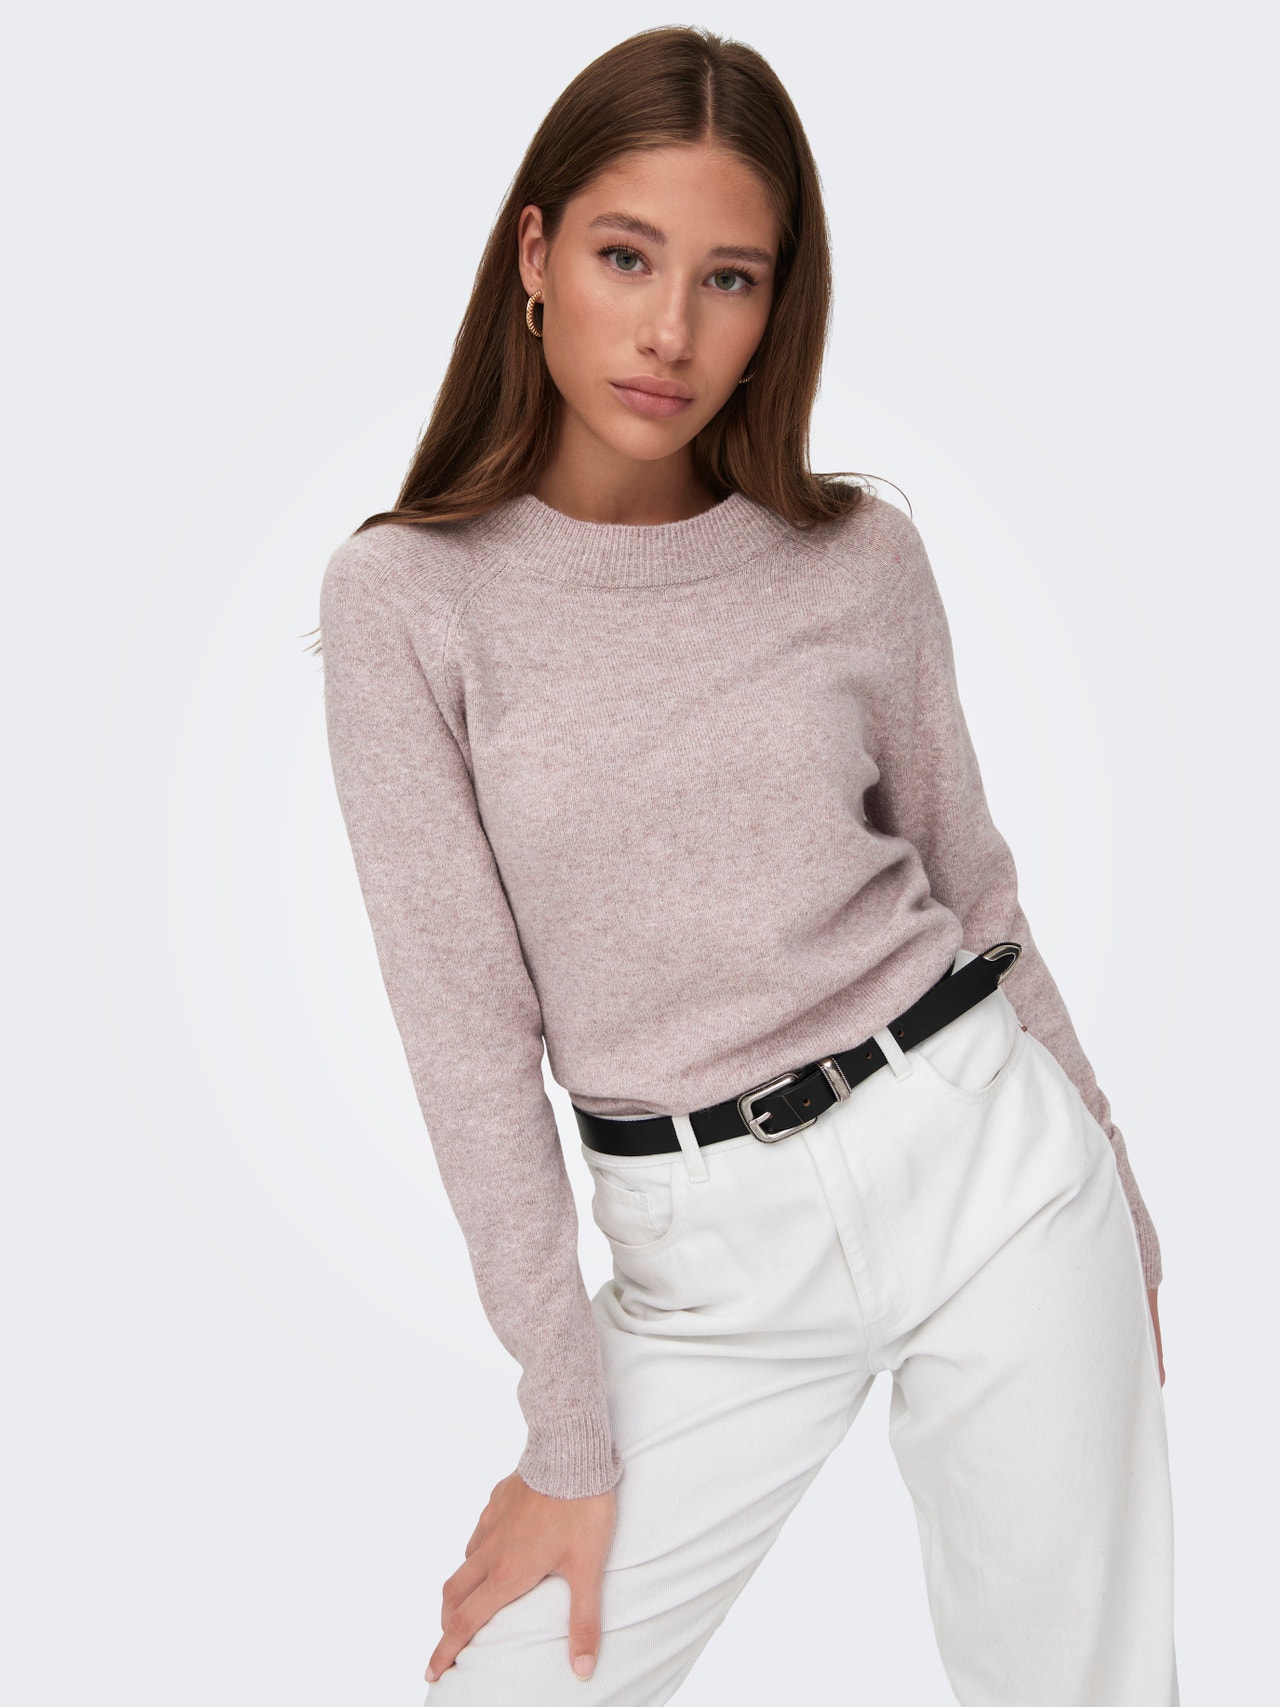 ONLY Round Neck Ribbed cuffs Pullover -Woodrose - 15204279